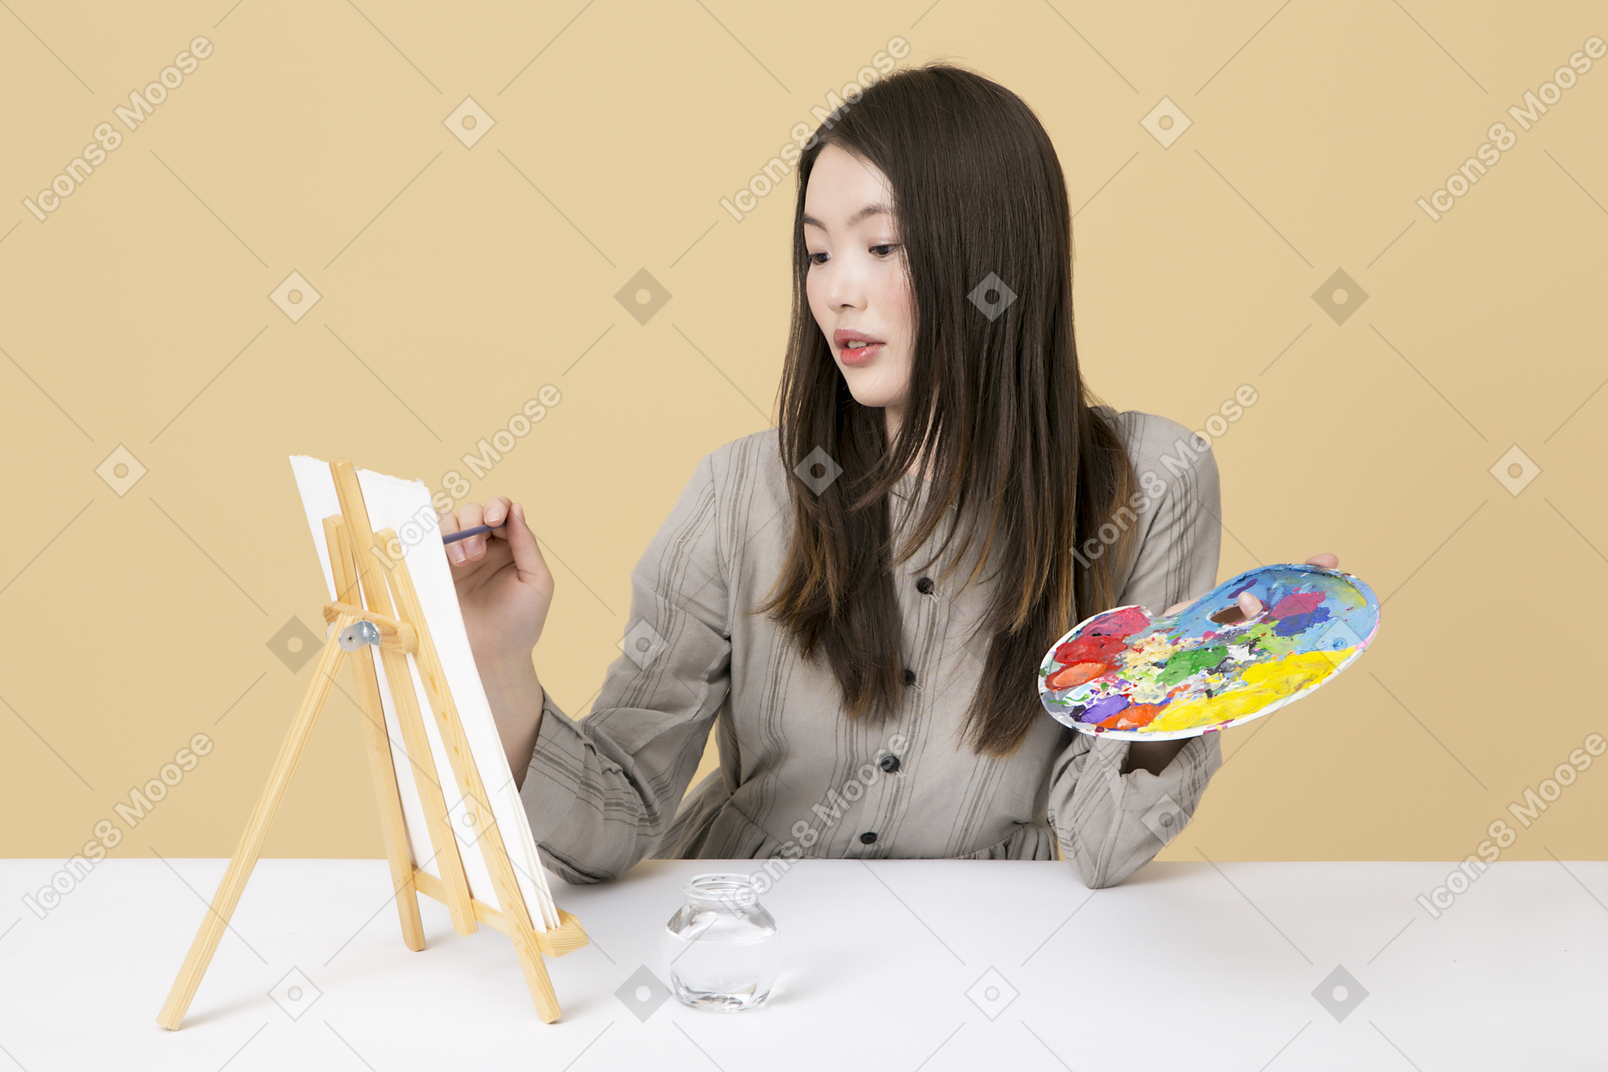 An artist in the making